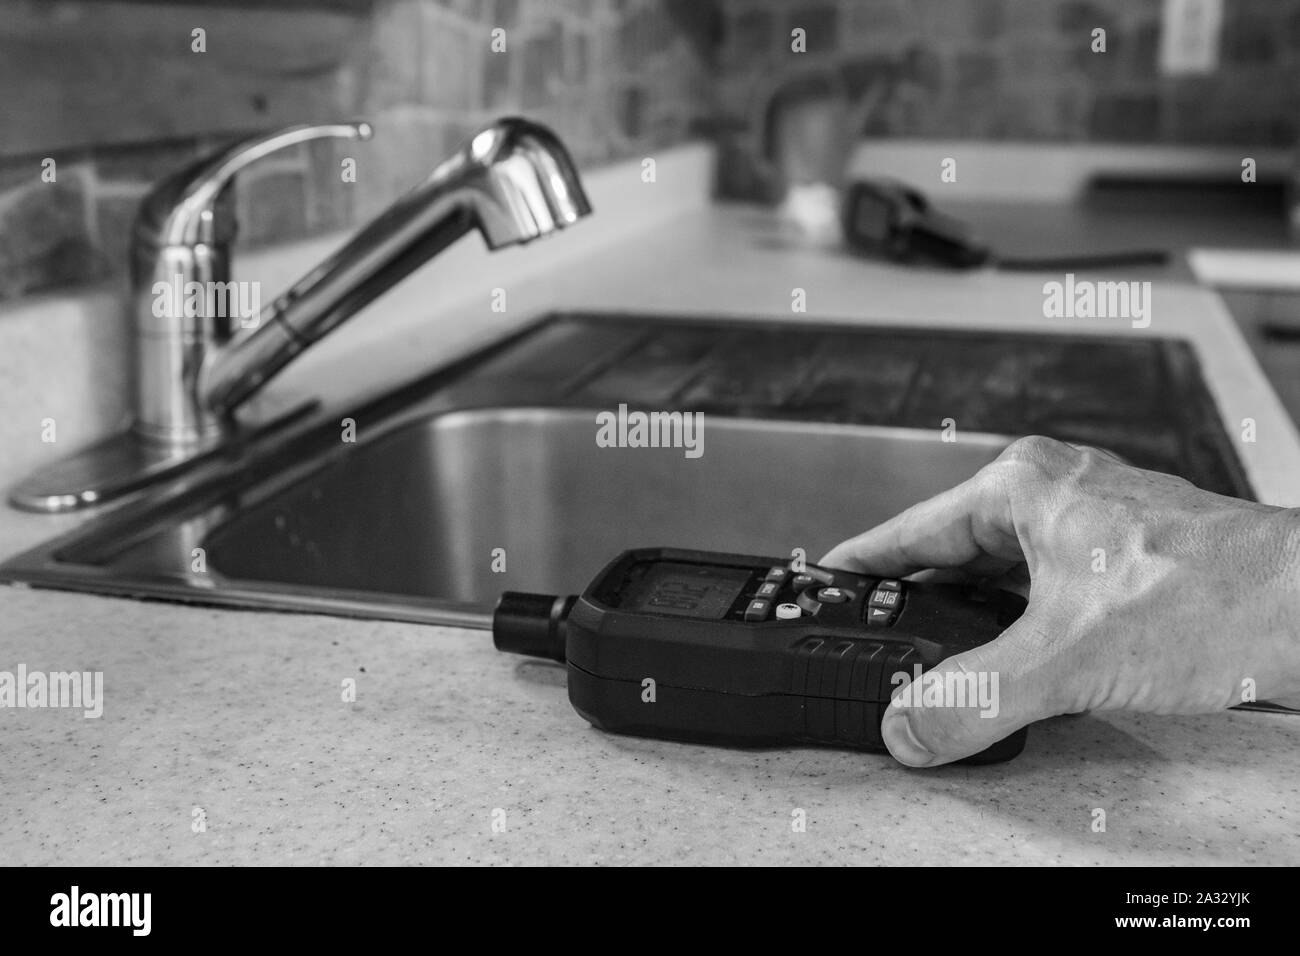 A close-up, black and white view of a person using an indoor air quality monitor, checking for pollutants and allergens inside a residential kitchen. Stock Photo